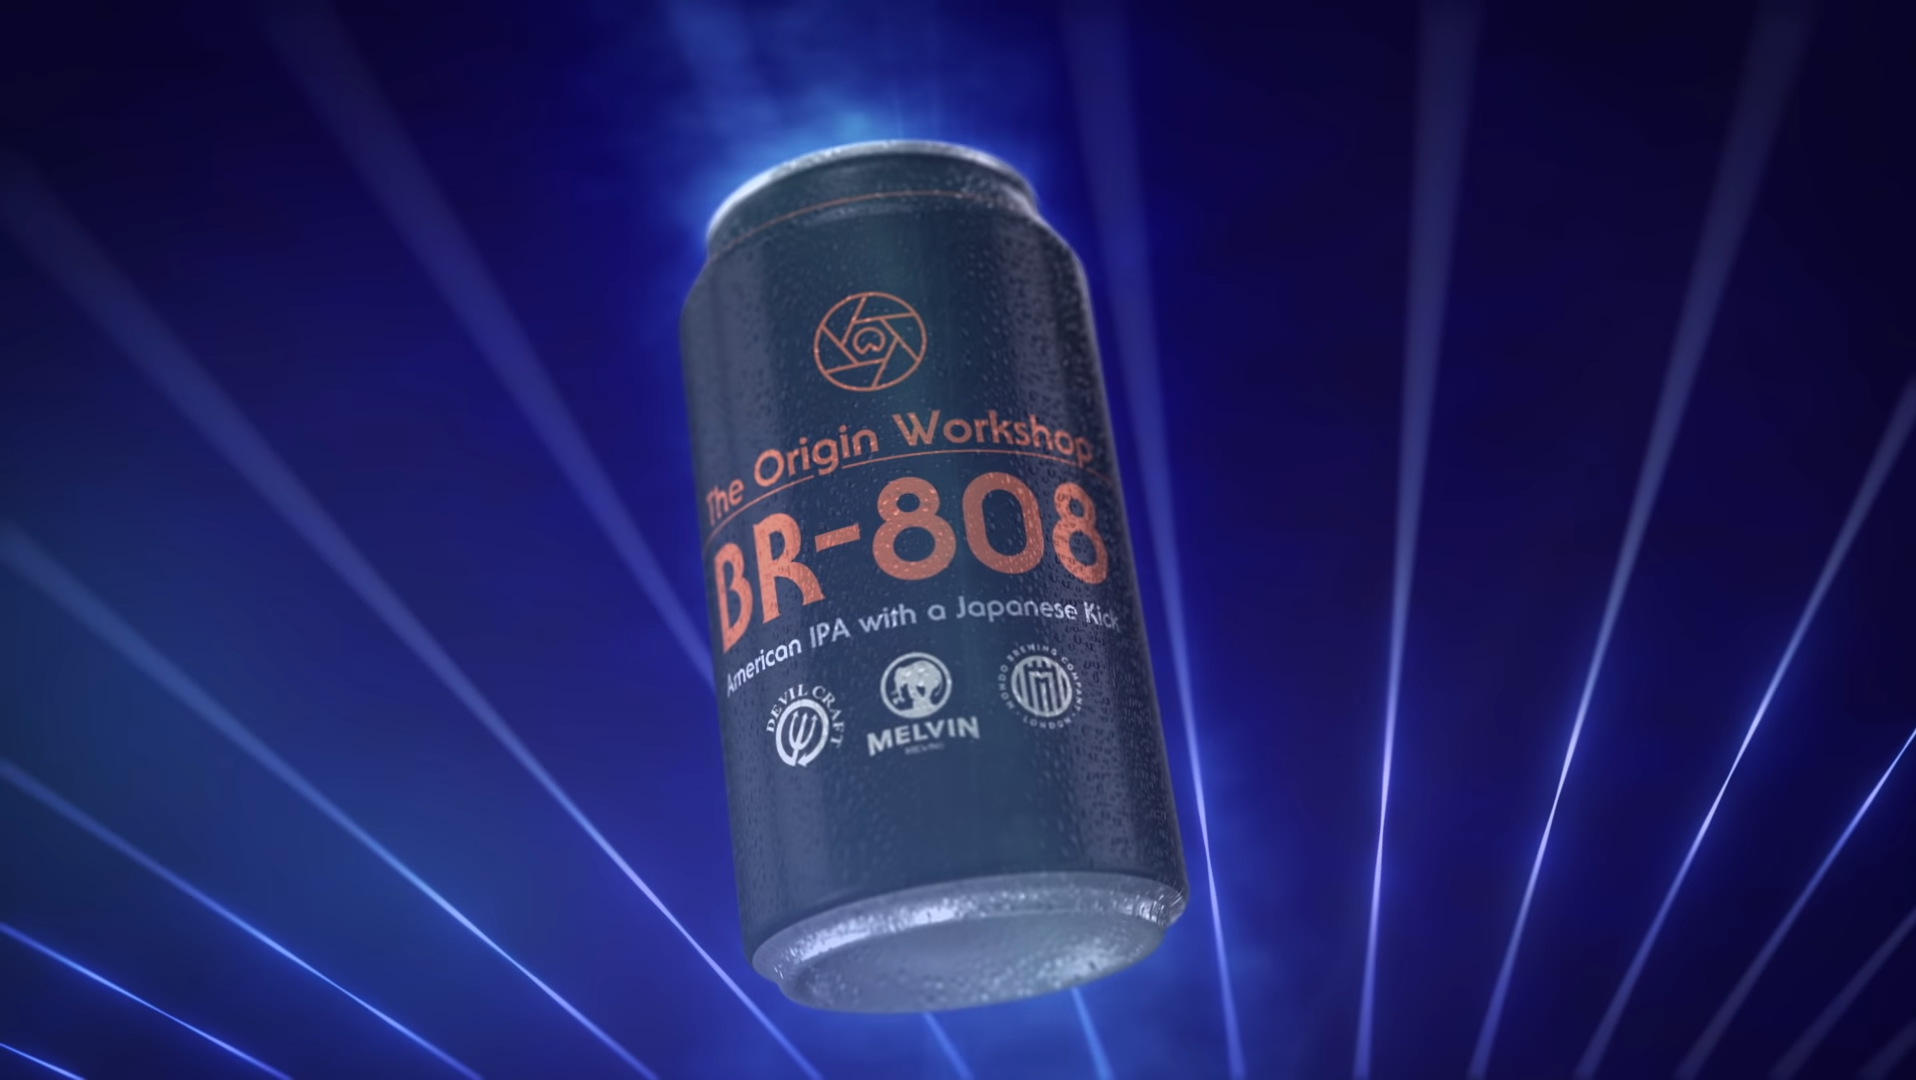 Roland’s 808 reaches it’s natural conclusion and becomes a beer